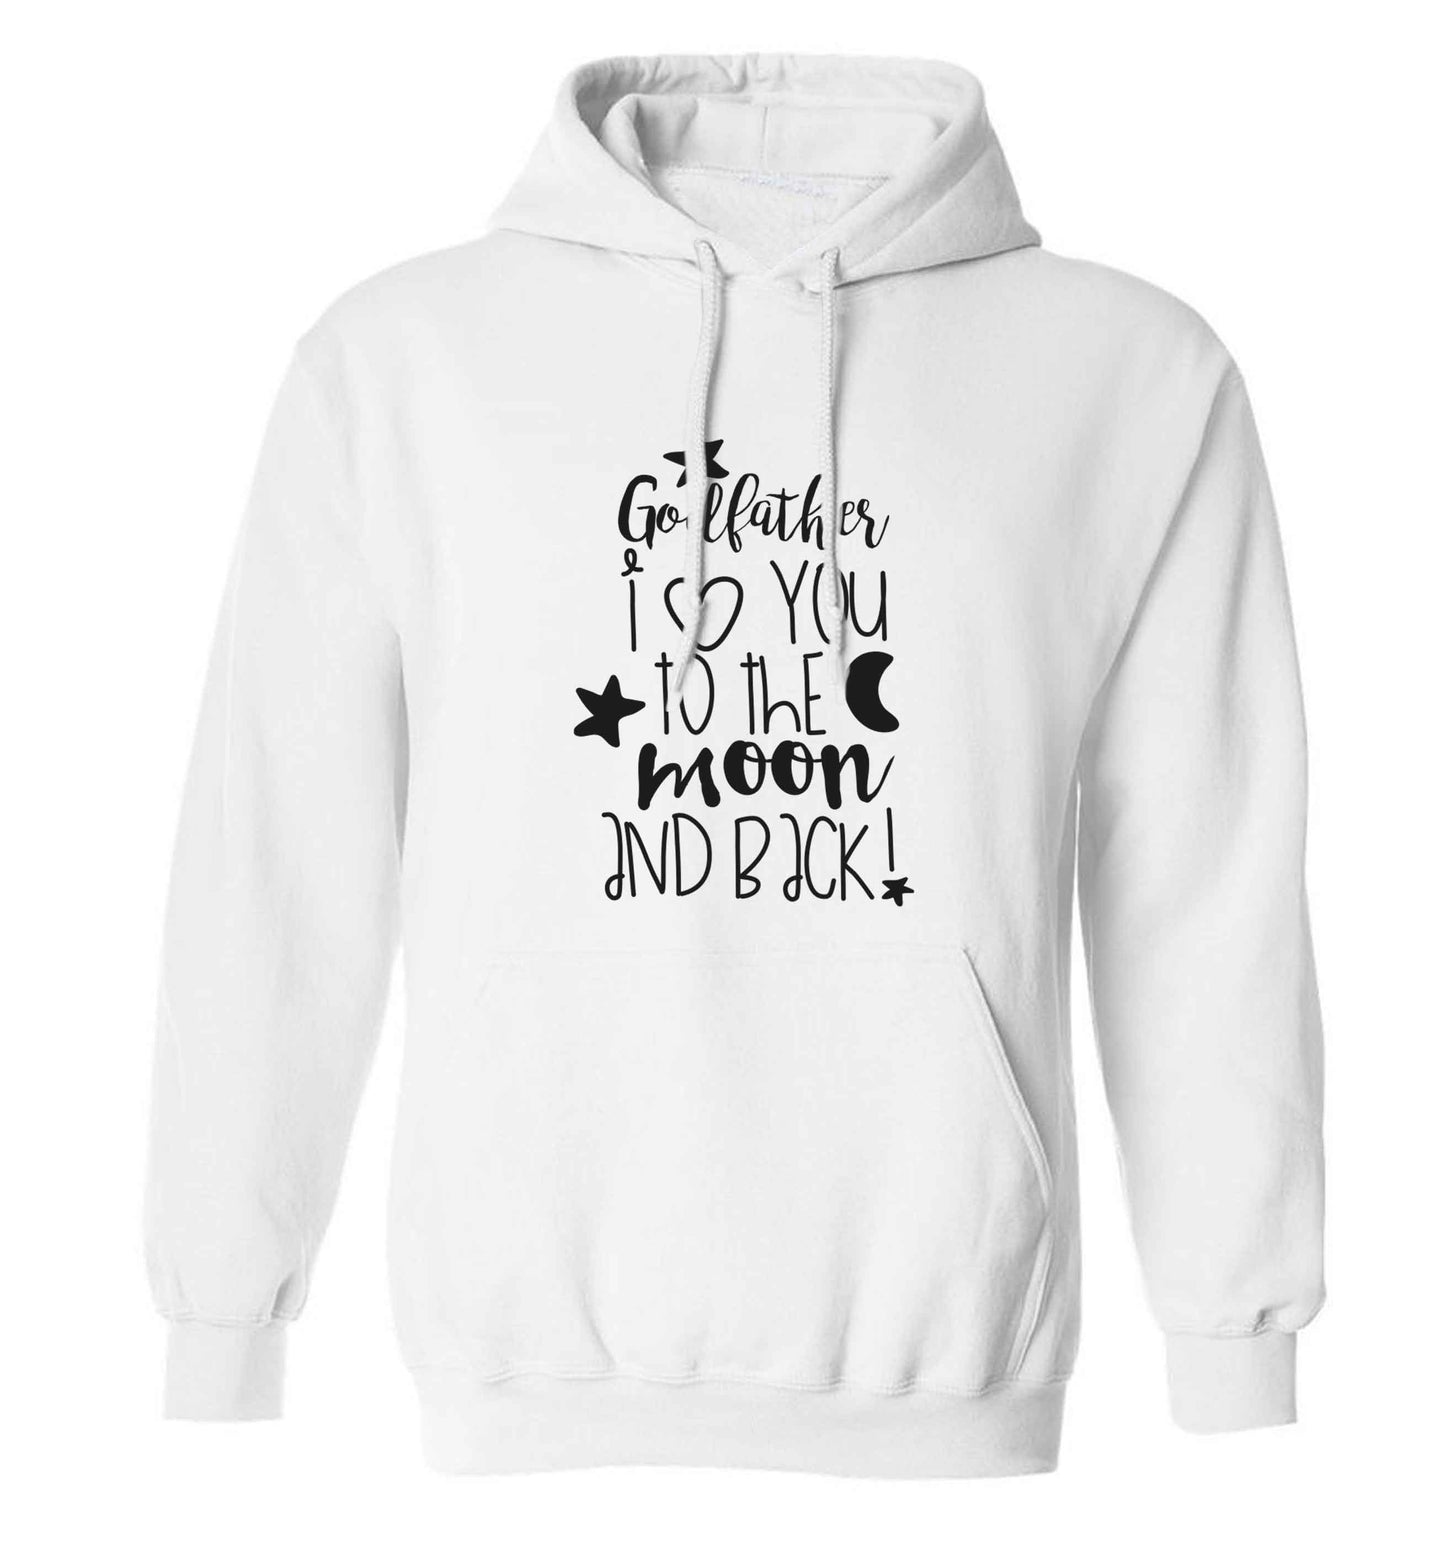 Godfather I love you to the moon and back adults unisex white hoodie 2XL